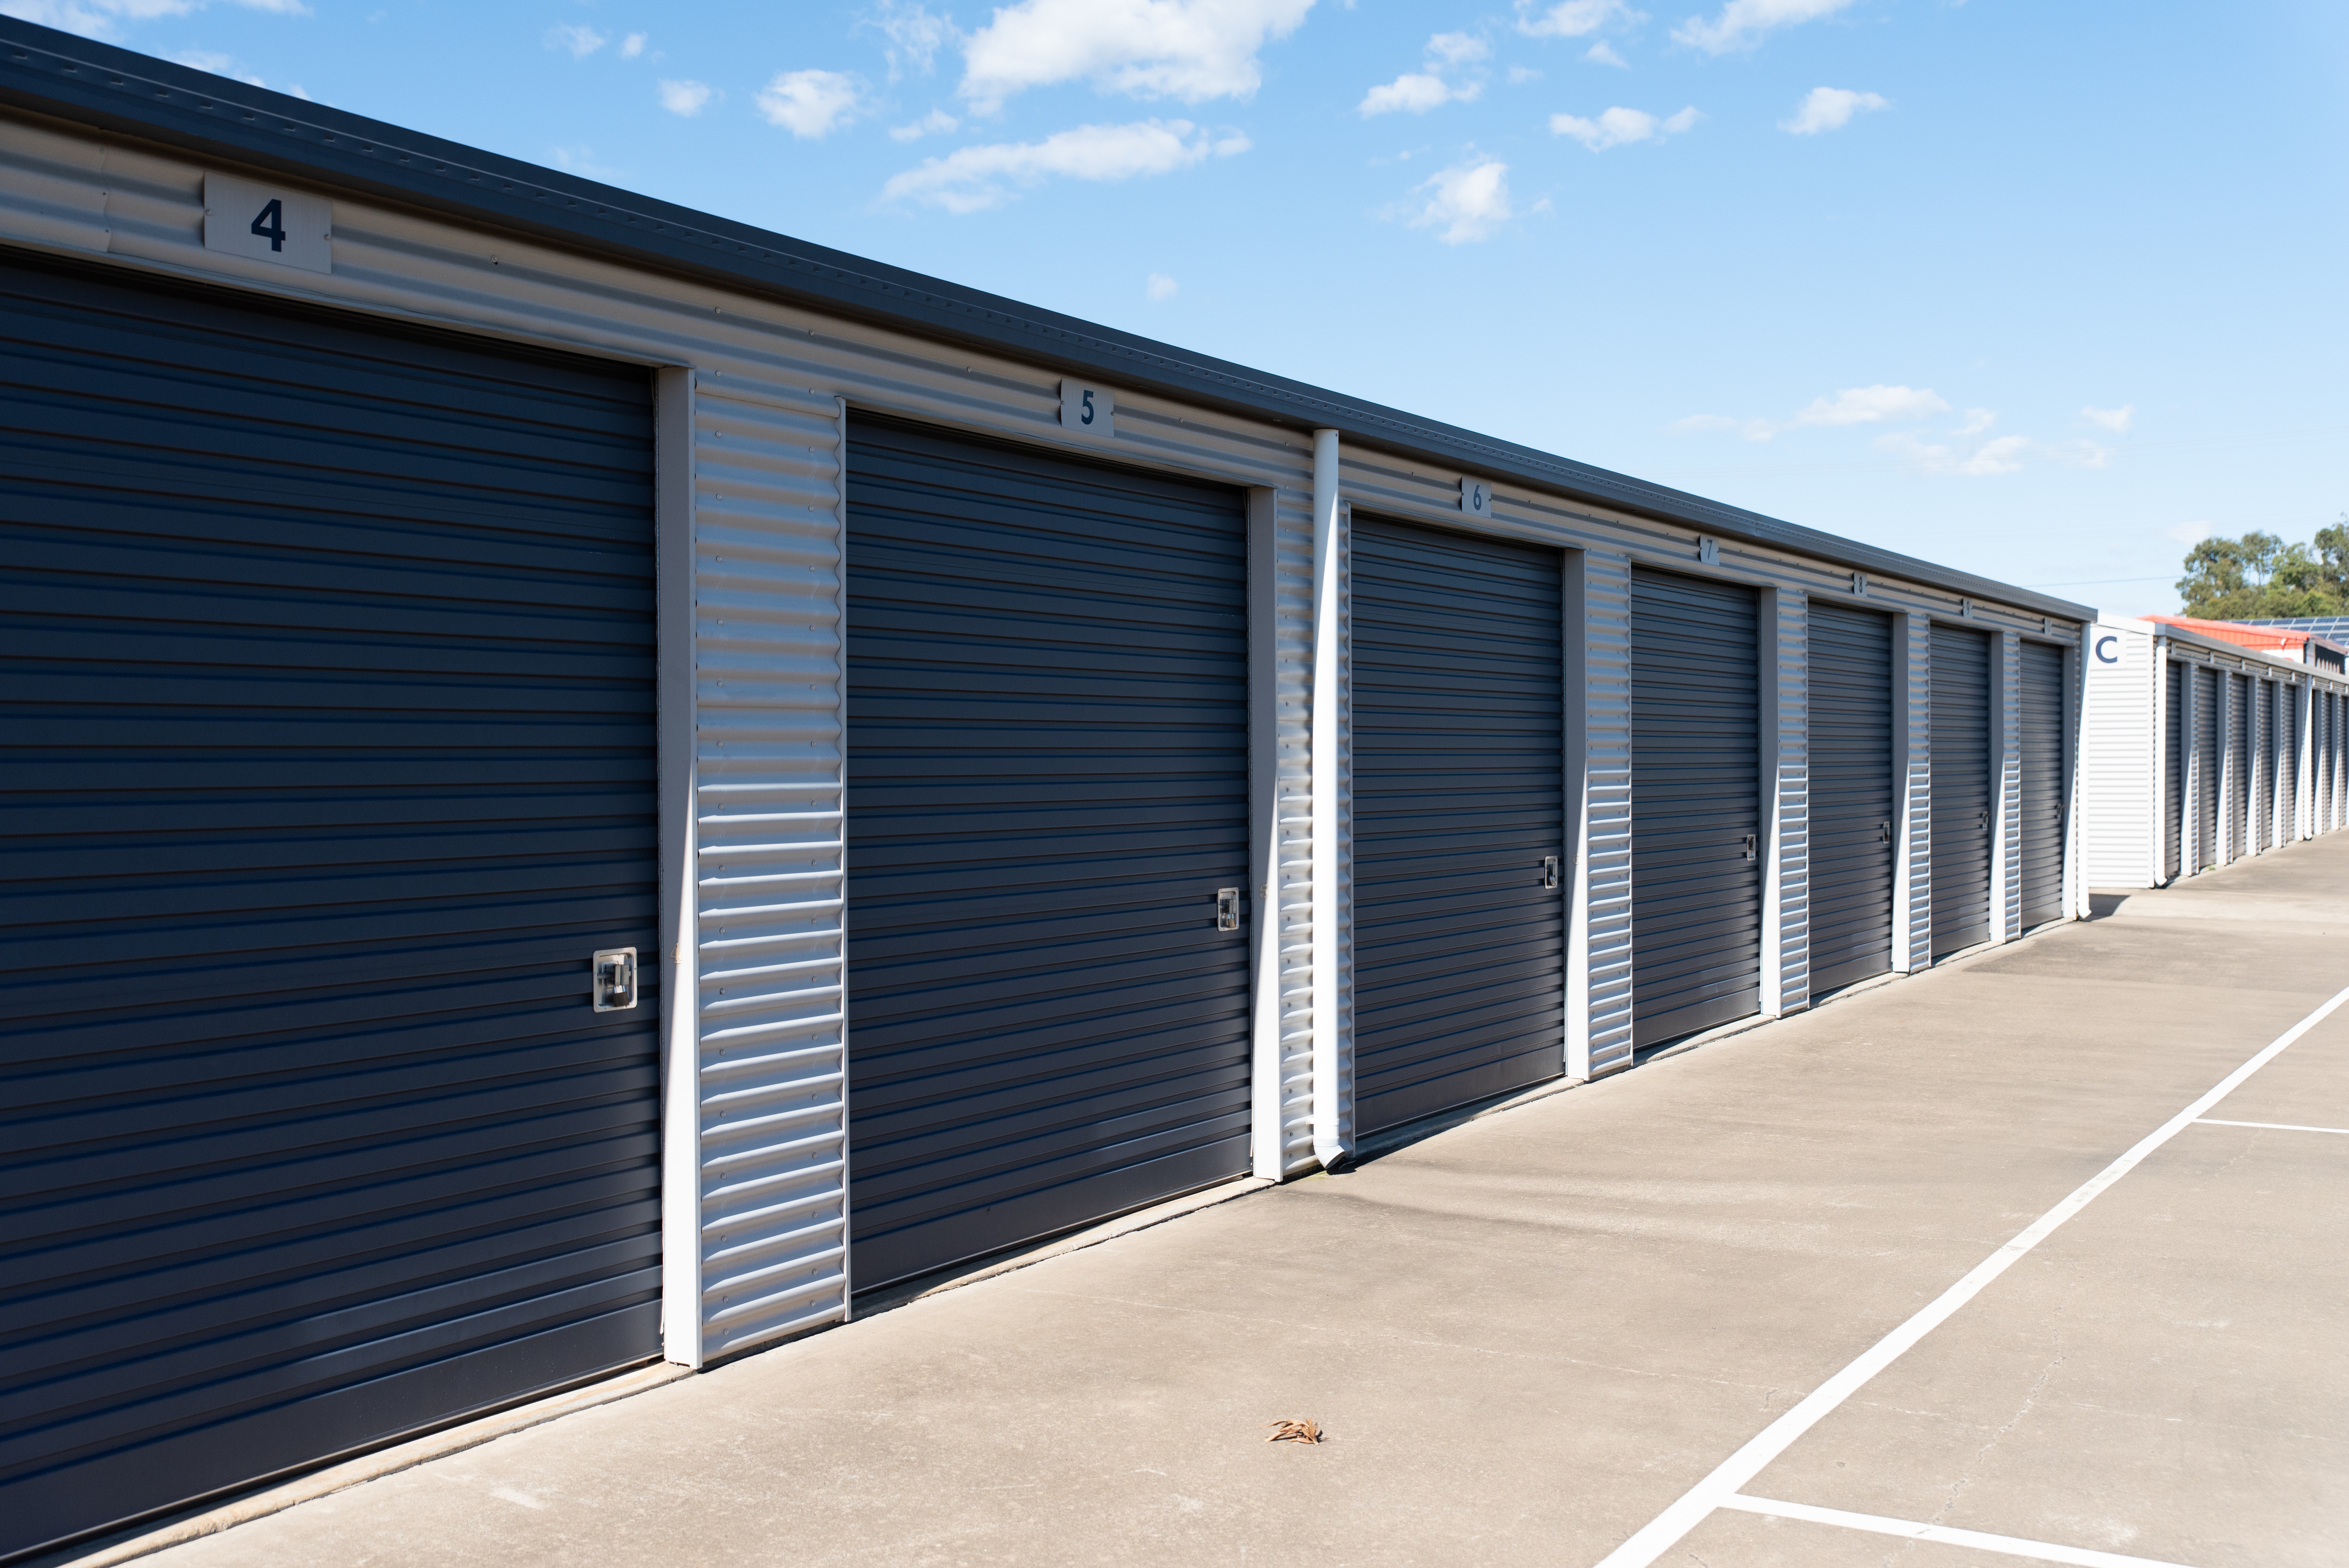 This Self-Storage REIT Has The Highest Upside According To Analysts